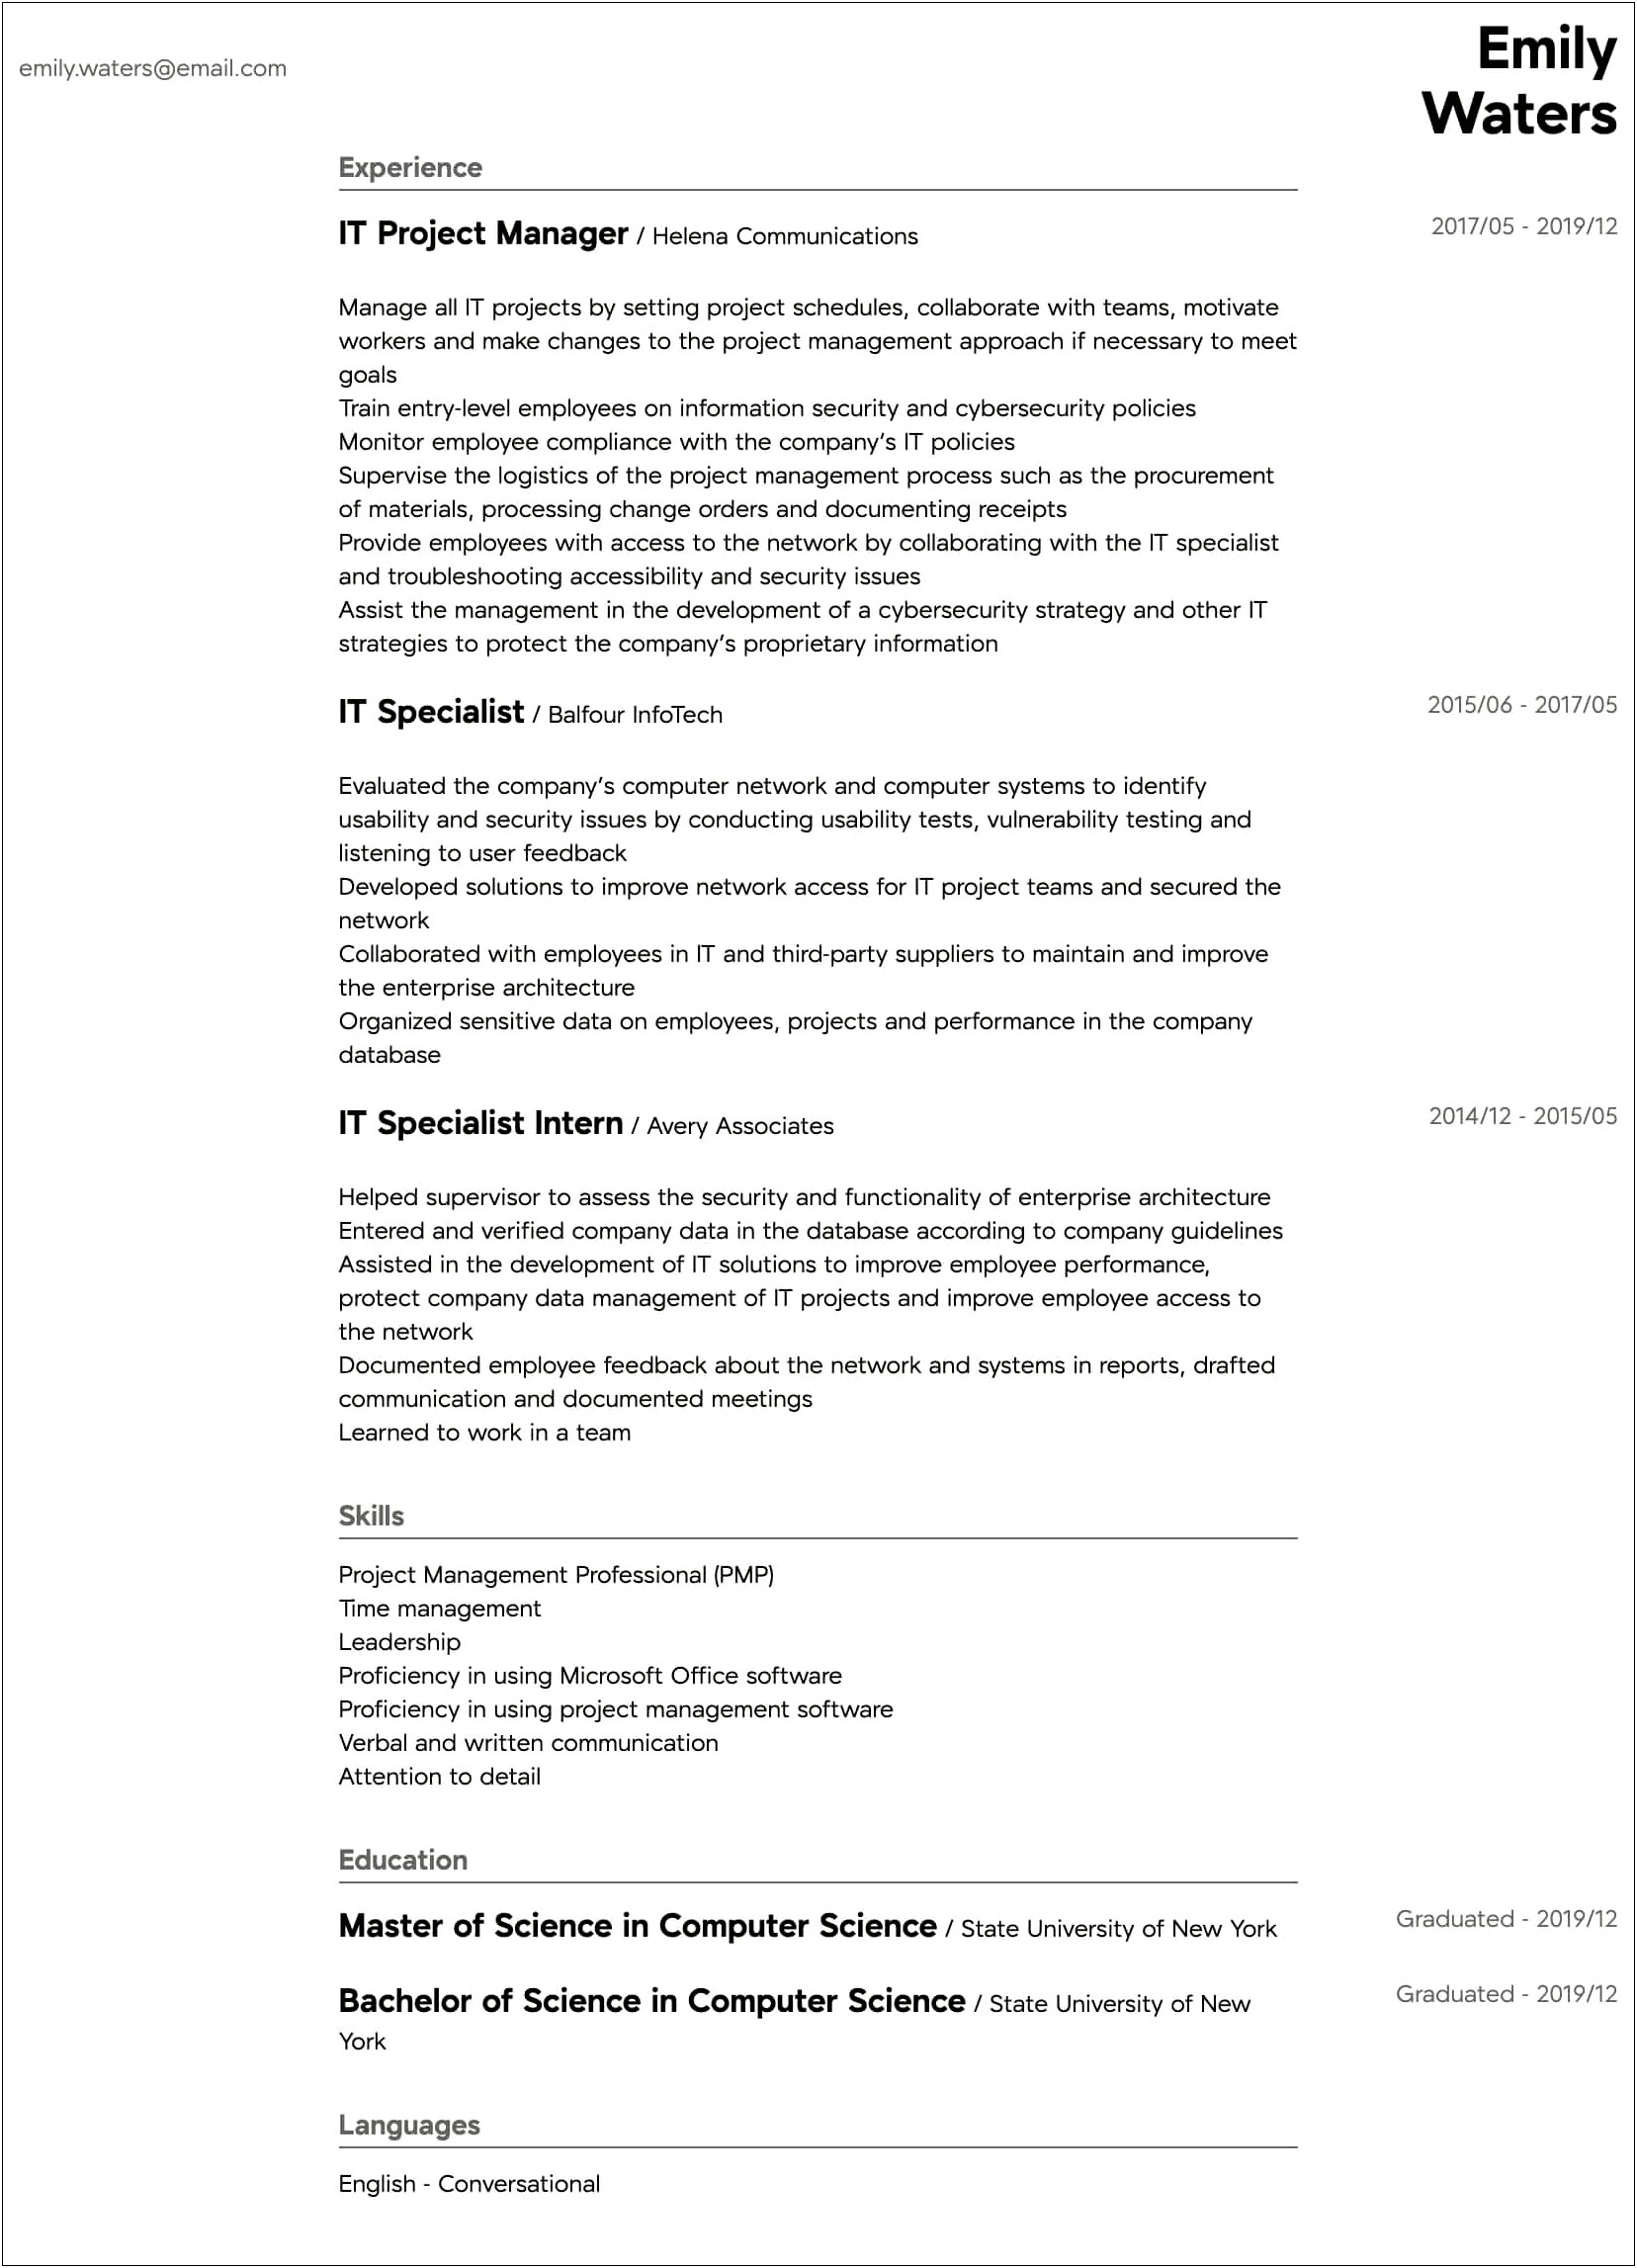 Resume Templates For Project Management Jobs